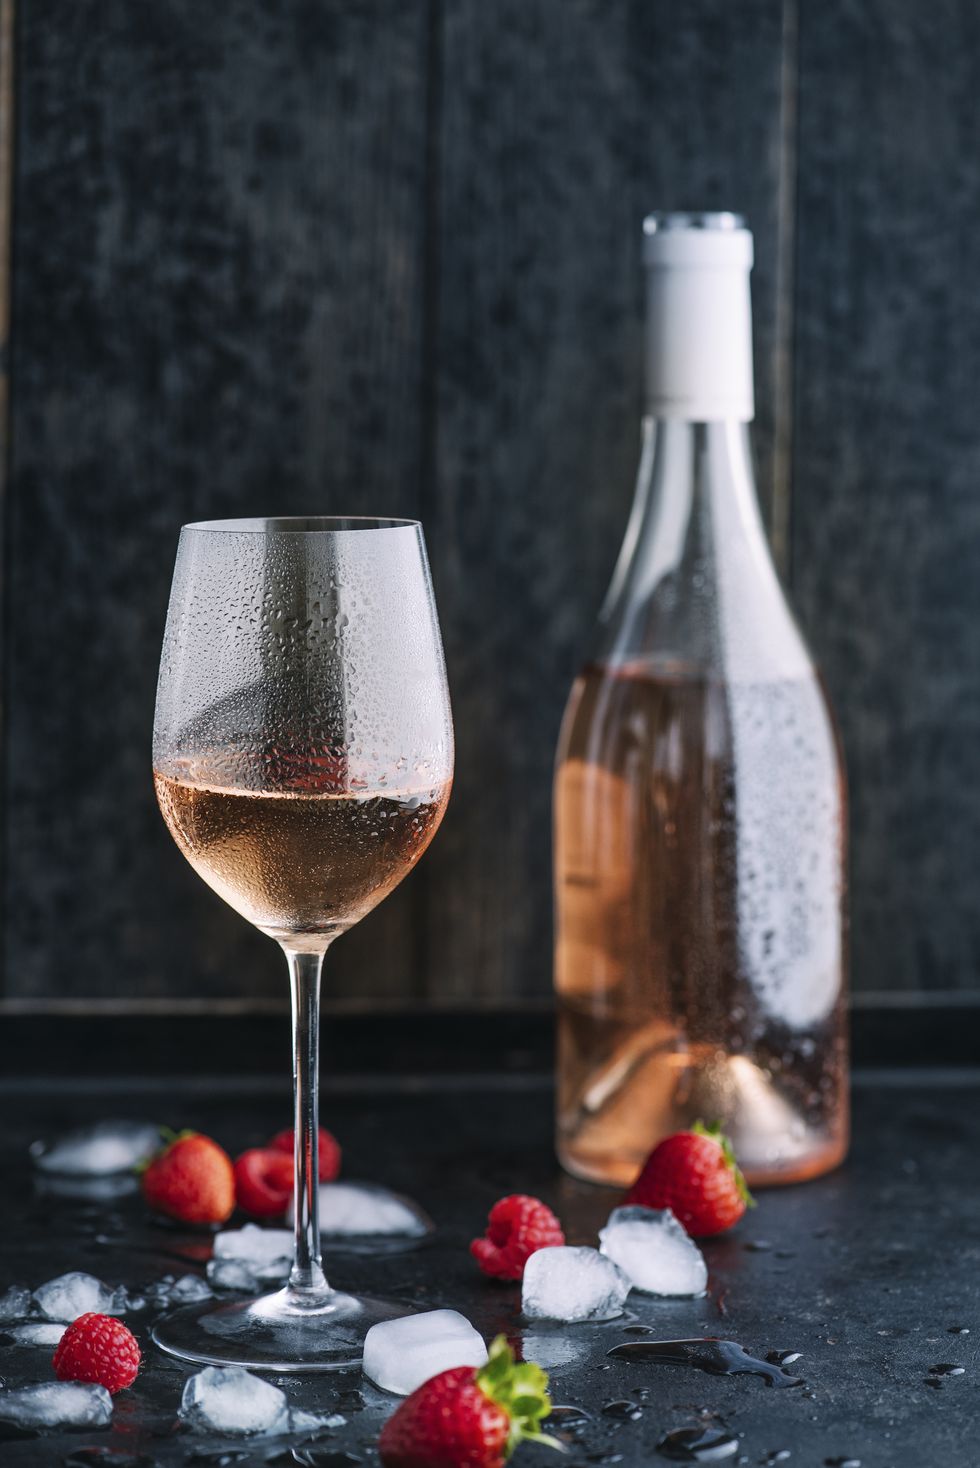 rosé wine with ice cubes and fruits as aroma symbols on dark background